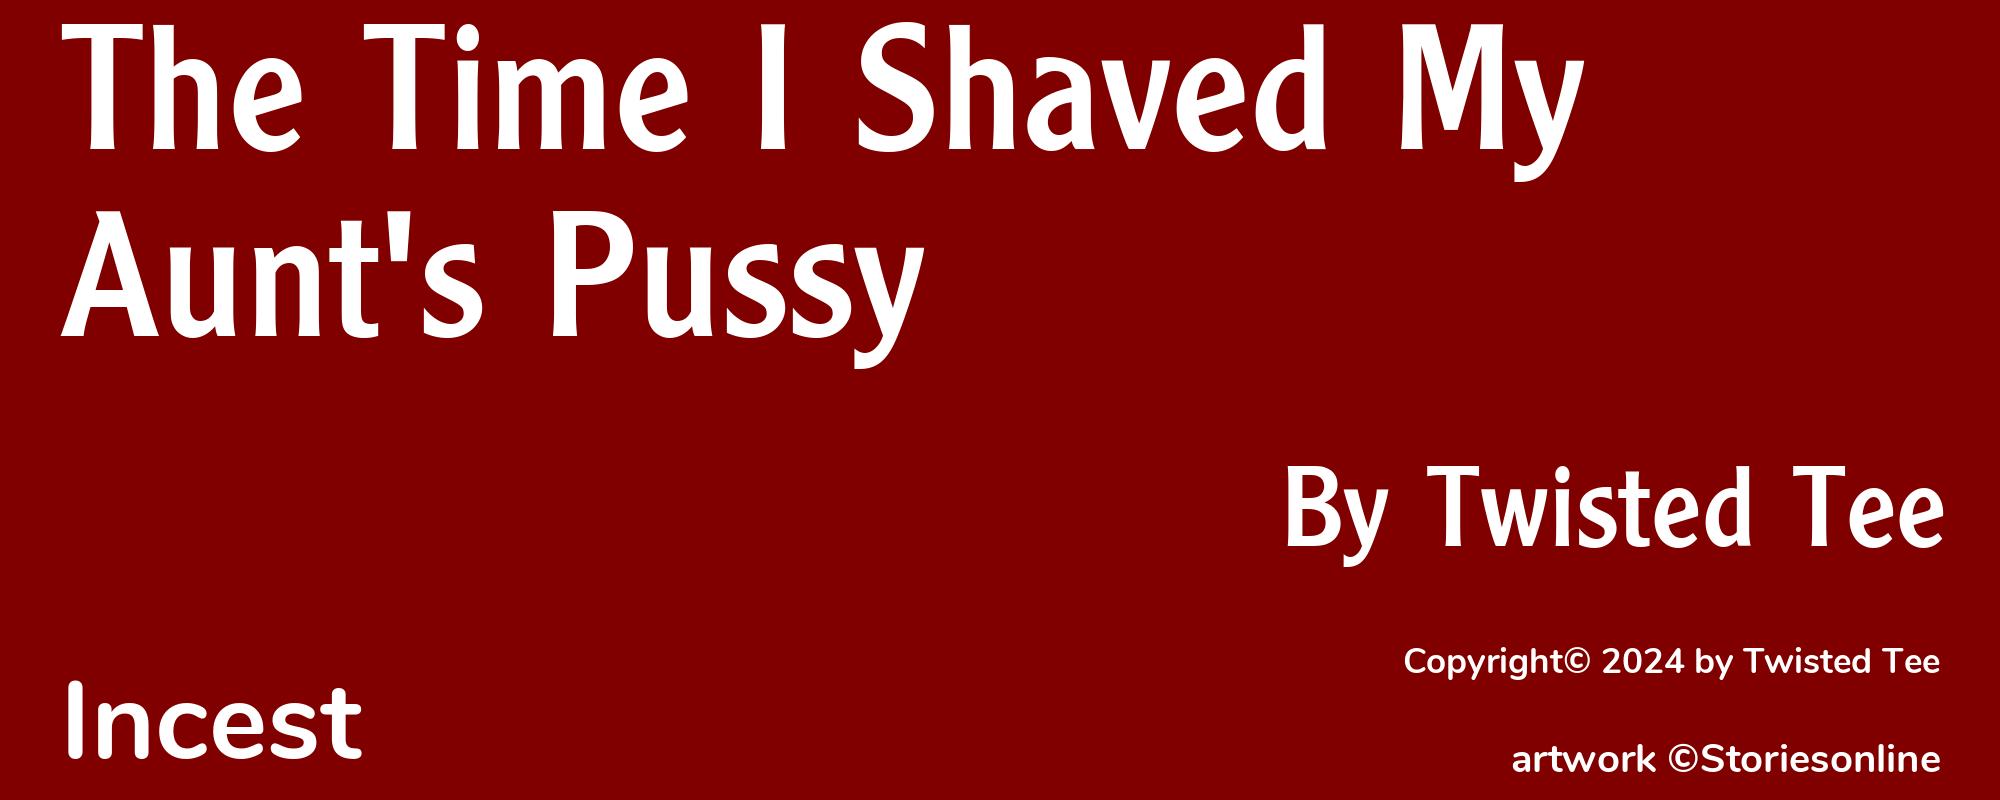 The Time I Shaved My Aunt's Pussy - Cover